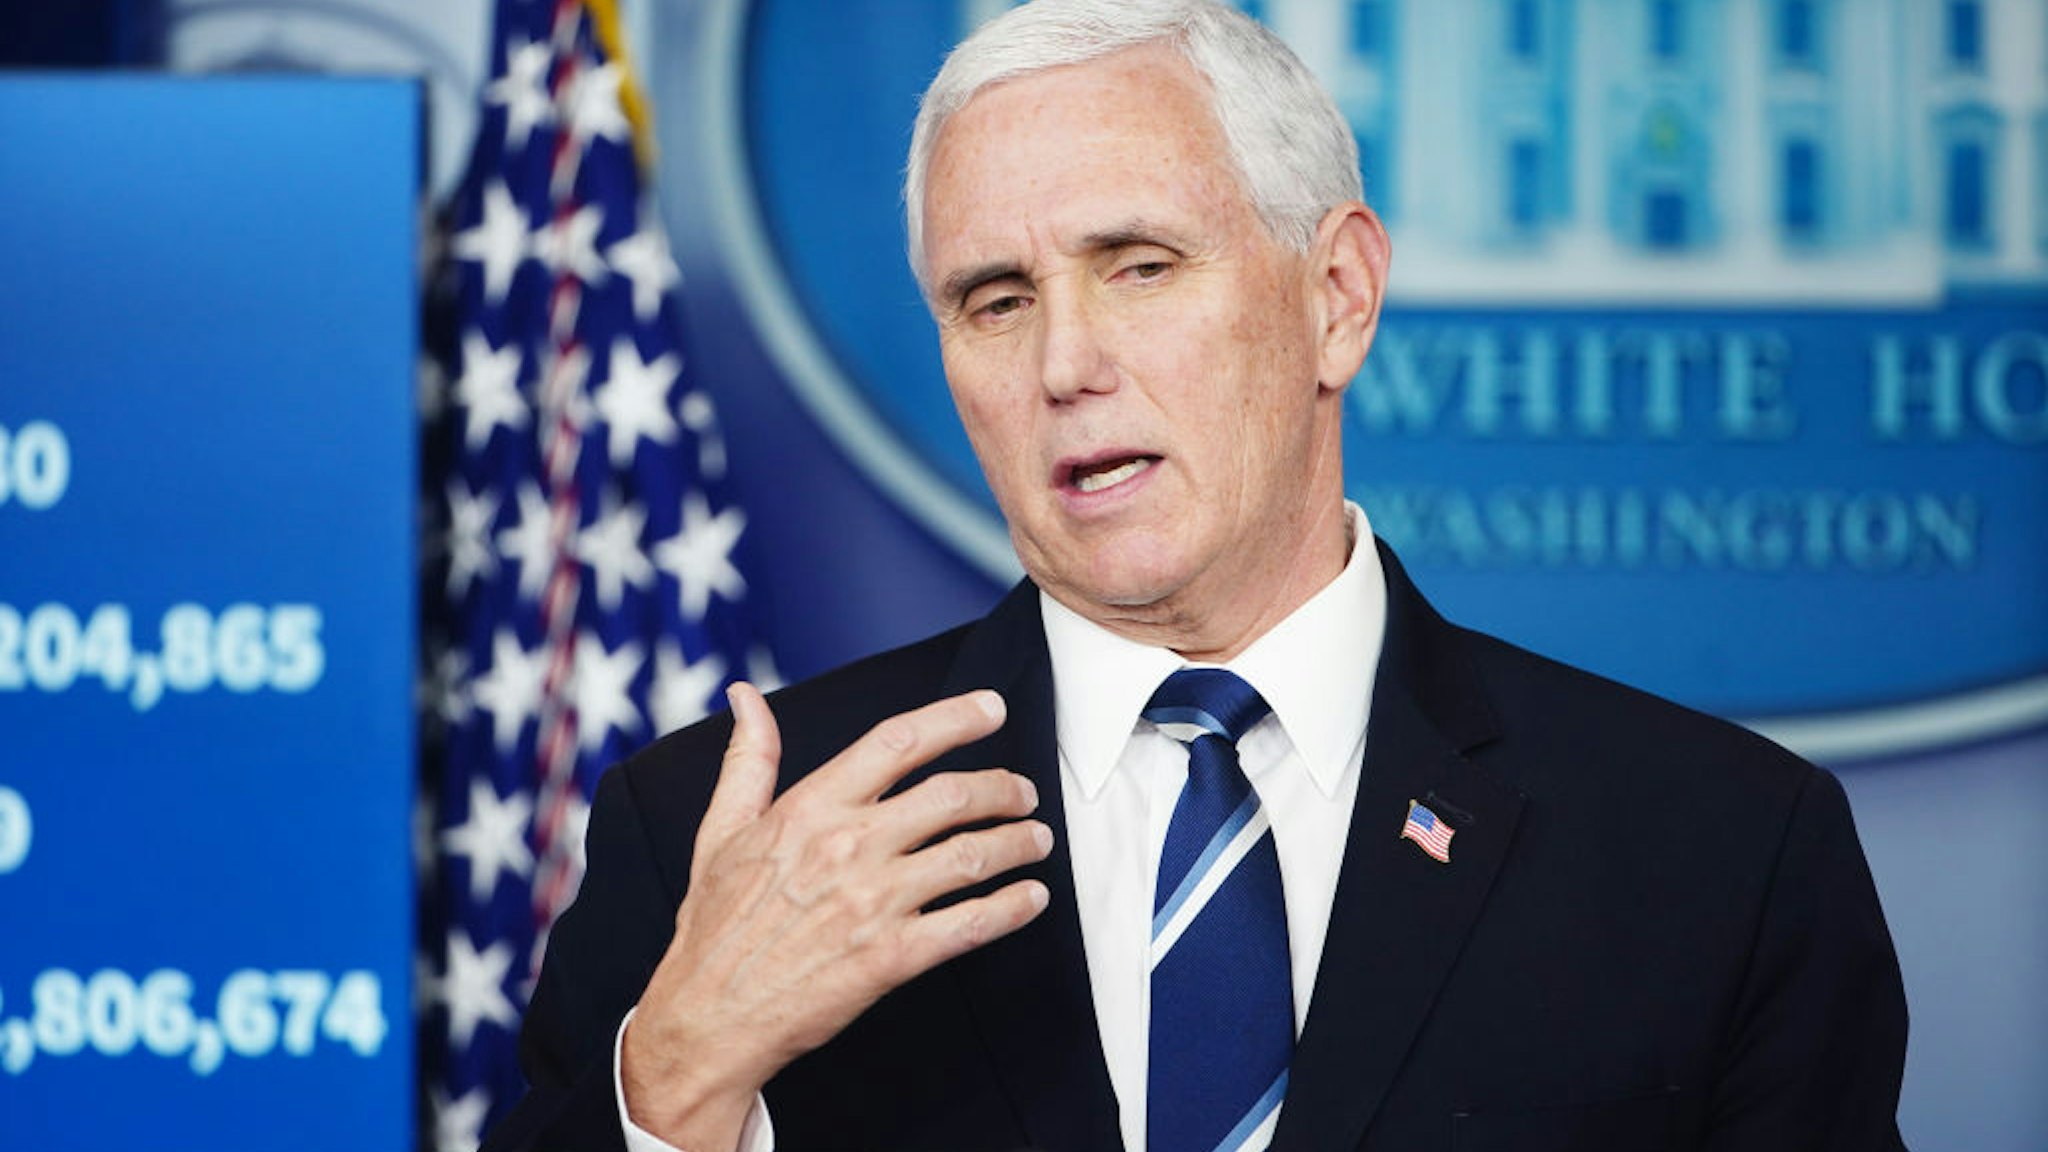 U.S. Vice President Mike Pence speaks during a Coronavirus Task Force news conference at the White House in Washington, D.C., U.S., on Tuesday, April 7, 2020.